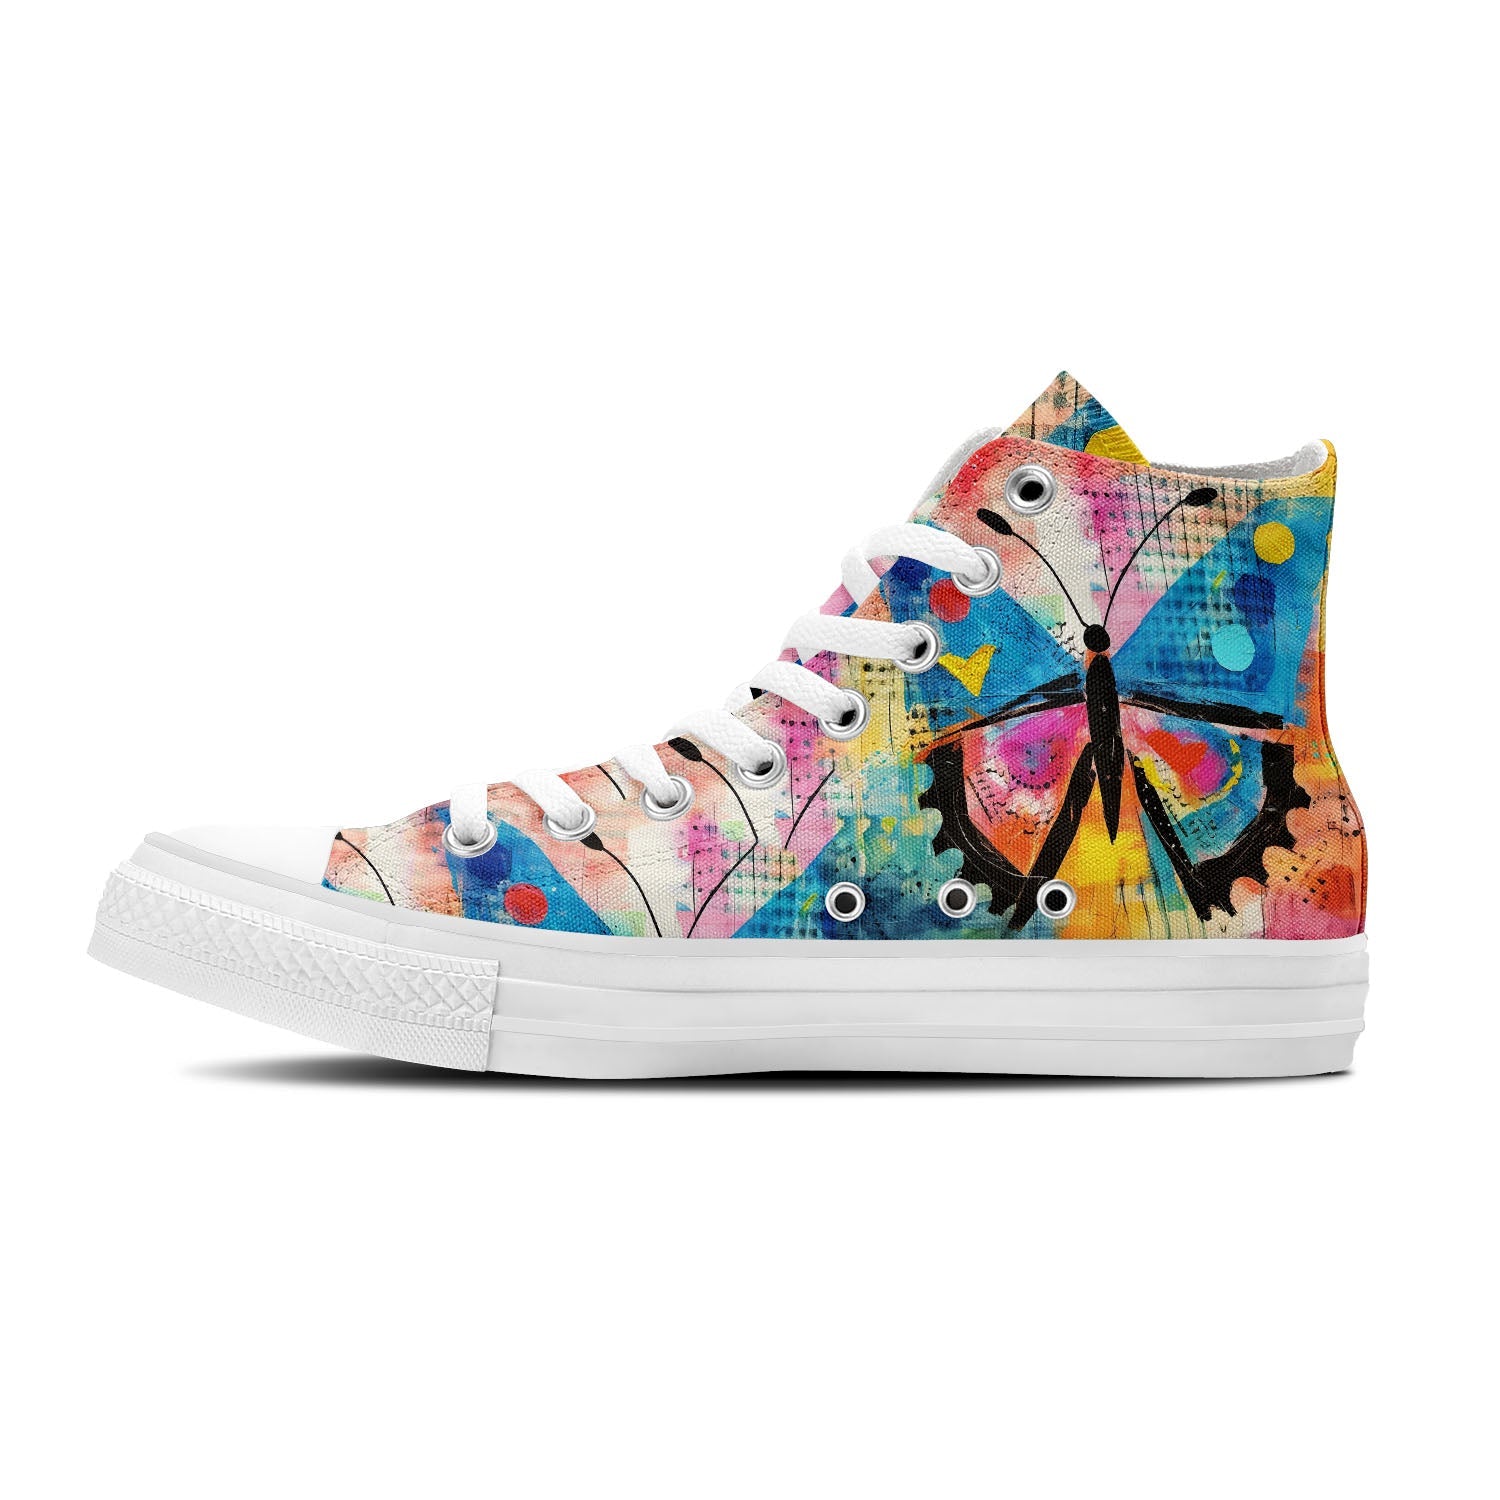 Fluttering Elegance: Men and Women's Mid-Top Canvas Shoes - Elevate Your Style with Central-High Canvas Shoes Featuring the Graceful Beauty of Artistic Butterfly Artistry